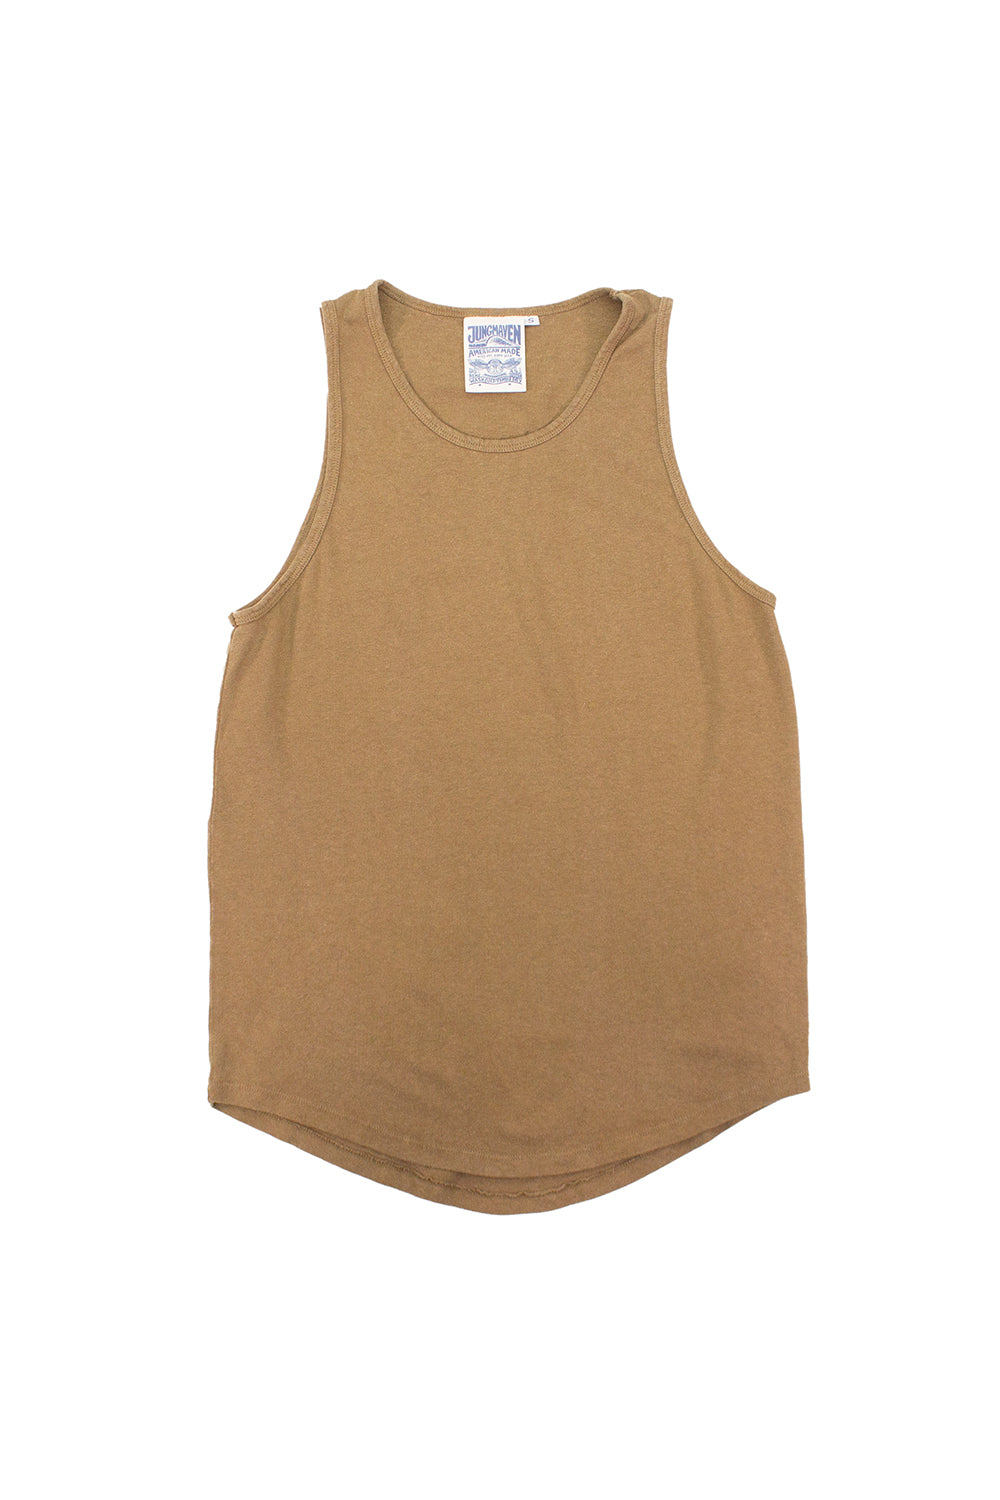 The Beach Company Orange Shirt Color Button Down Sleeveless Top (44) :  : Clothing & Accessories